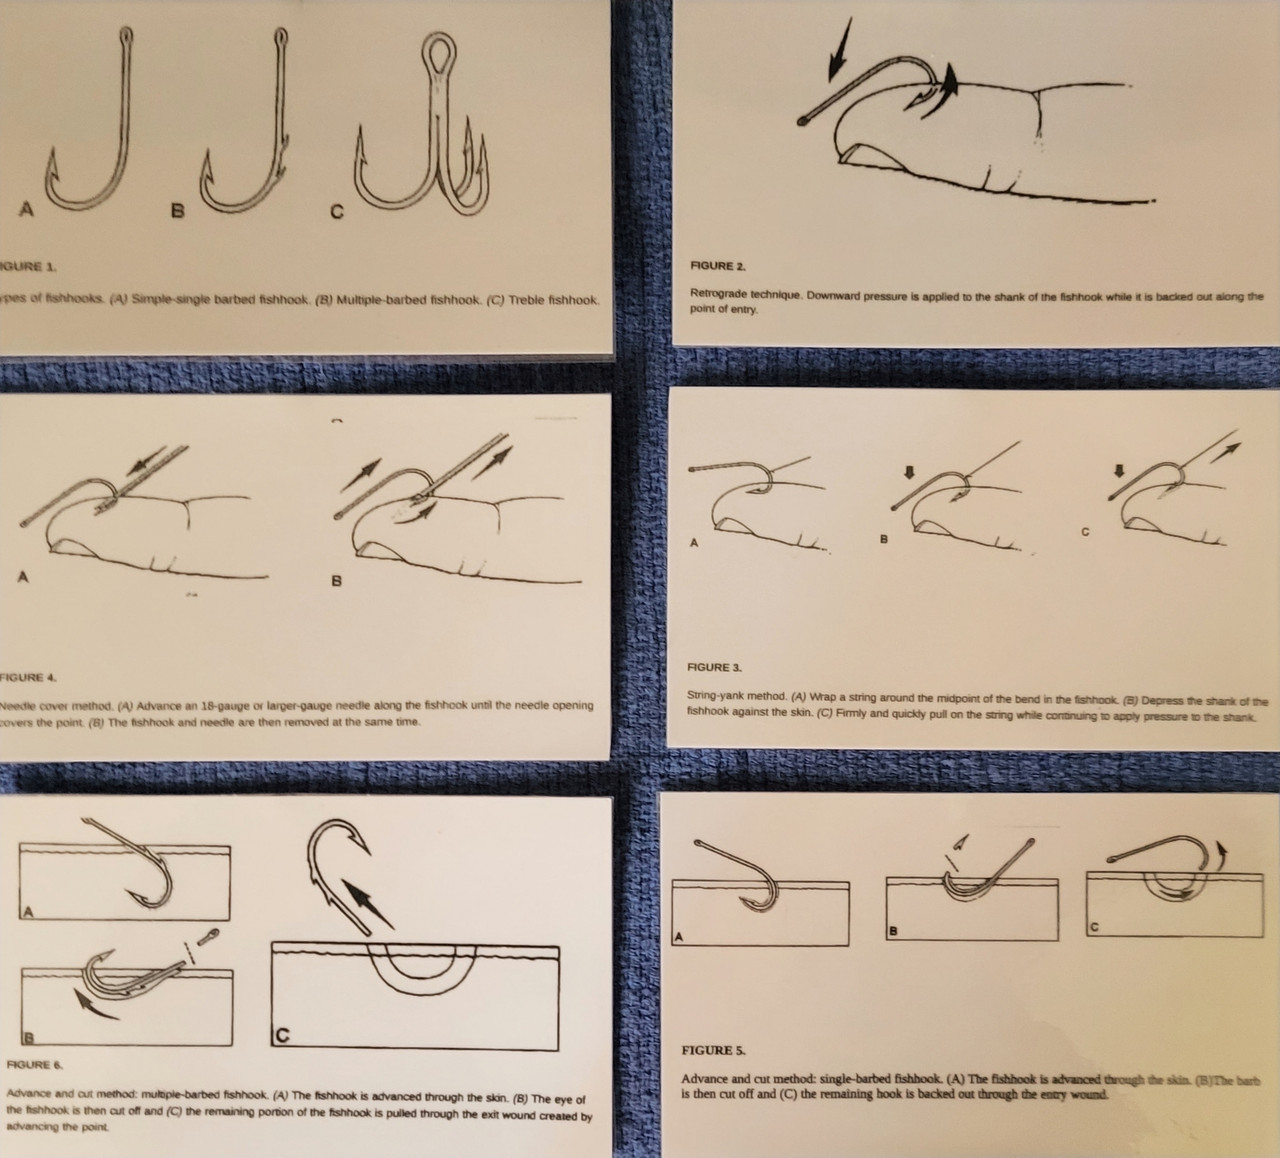 Fish Hook Removal Cards